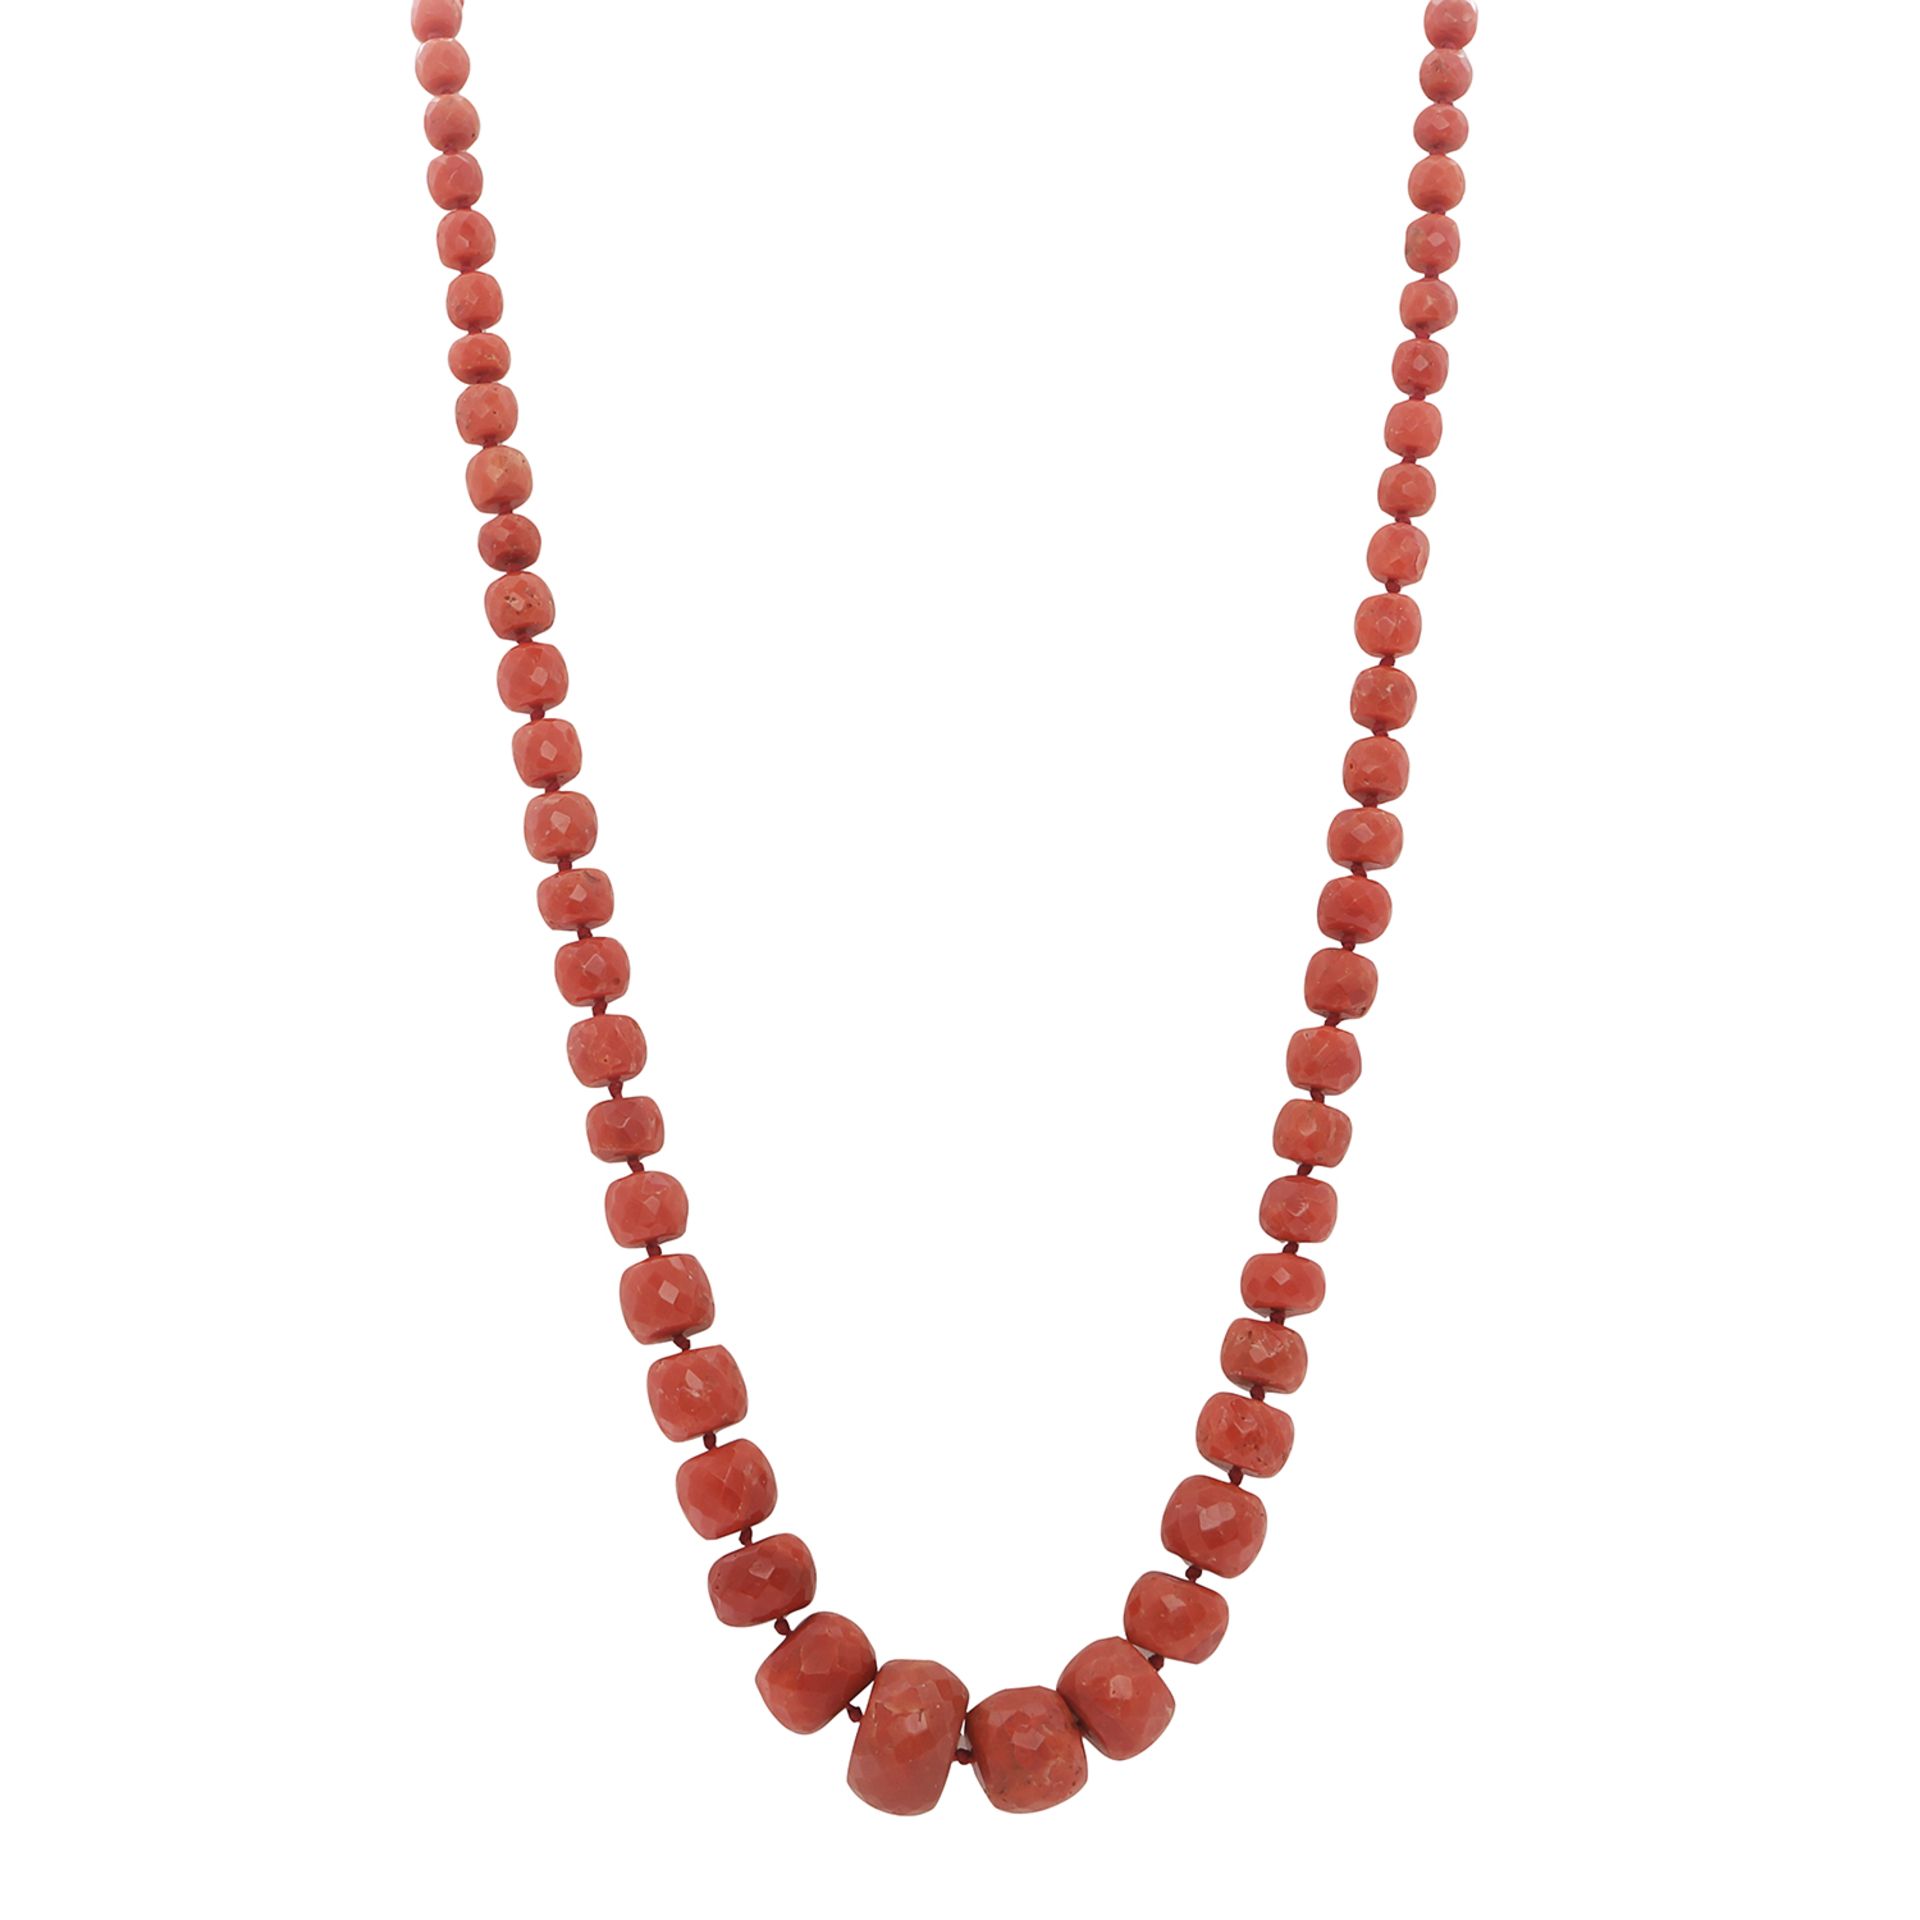 AN ANTIQUE CORAL BEAD NECKLACE comprising a single row of faceted coral beads up to 20.8mm in